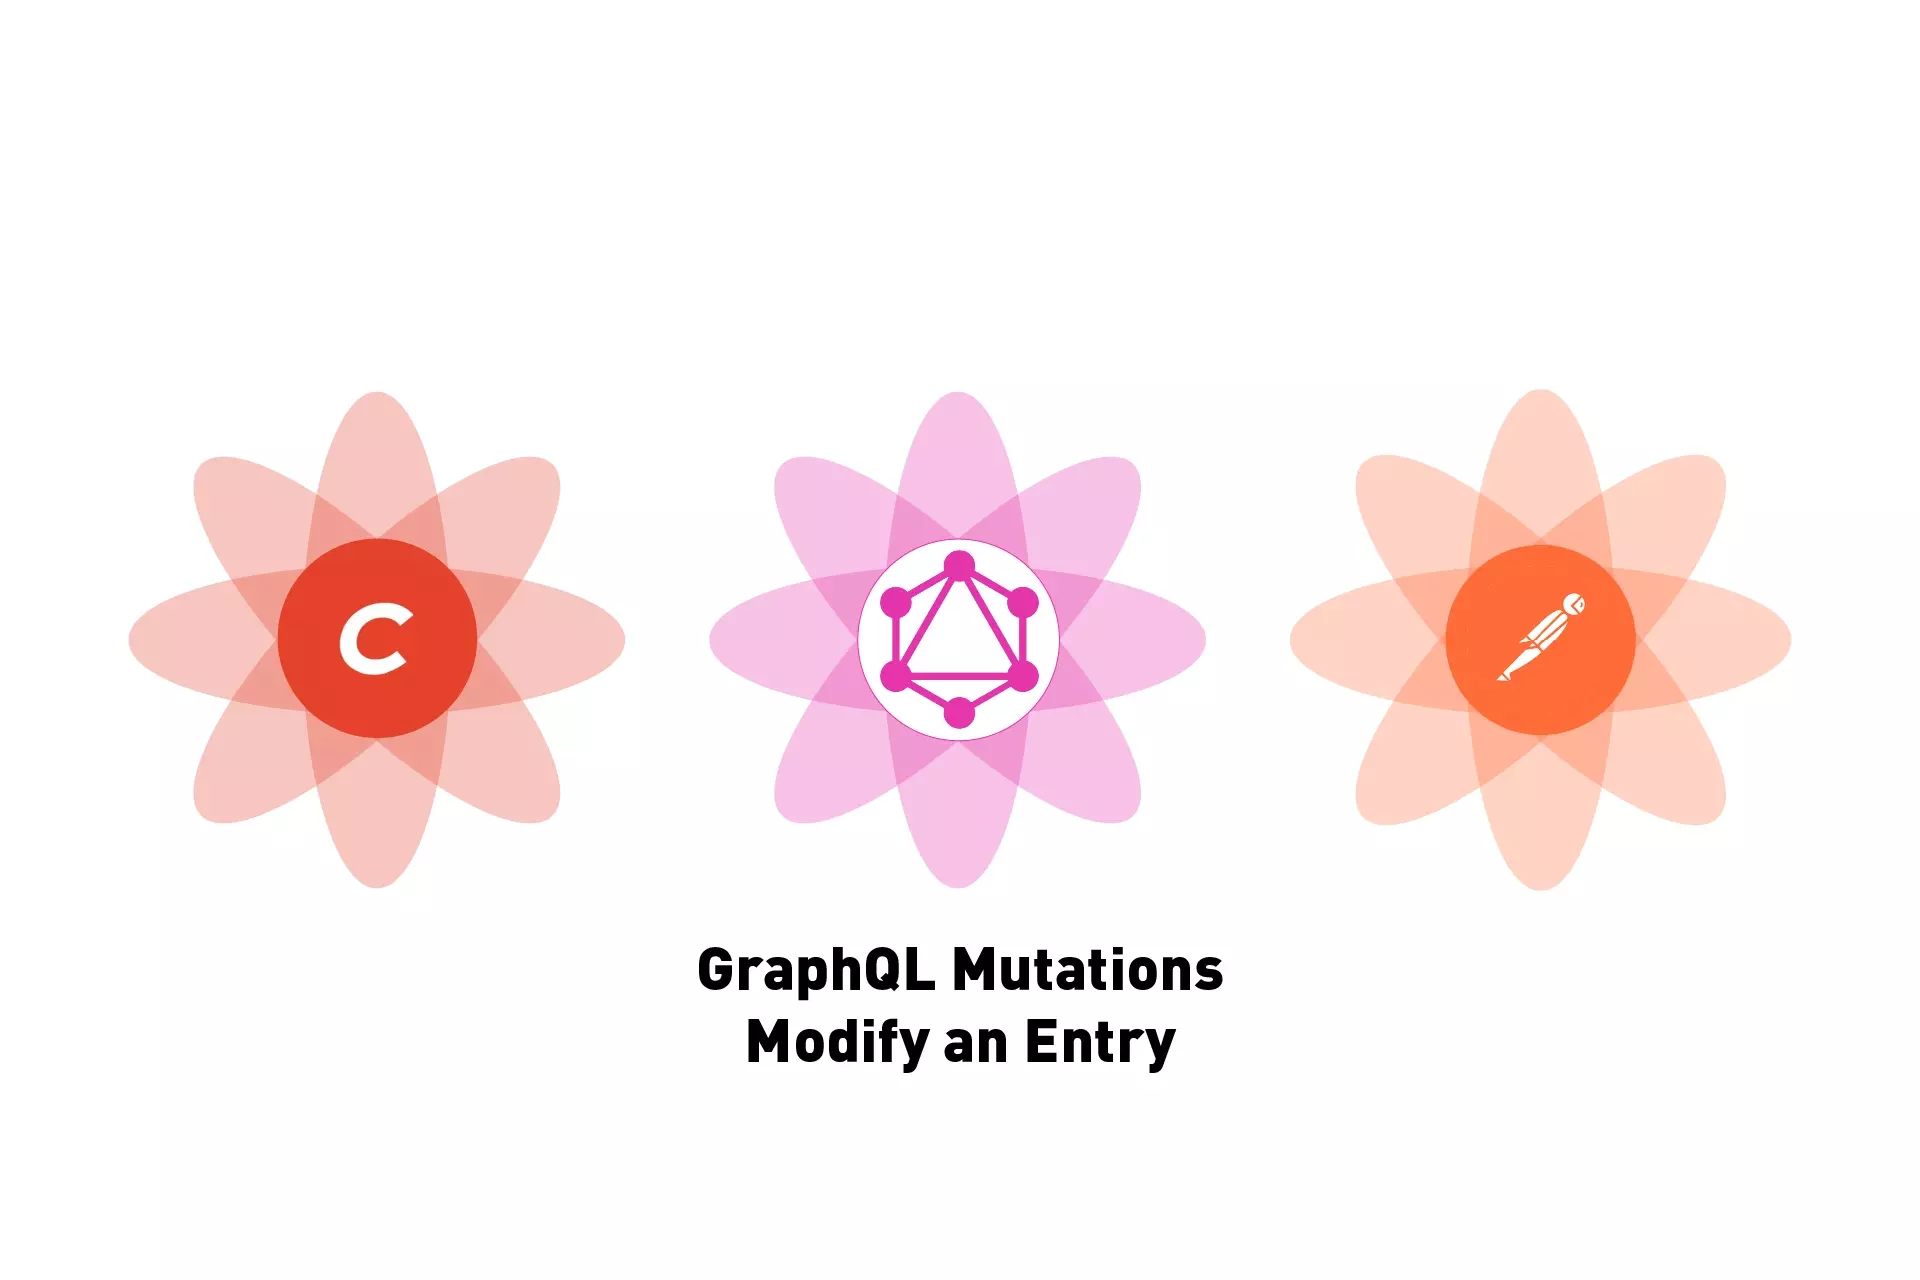 Three flowers that represents Craft CMS, GraphQL and Postman side by side. Beneath them sits the text "GraphQL Mutations Modify an Entry".